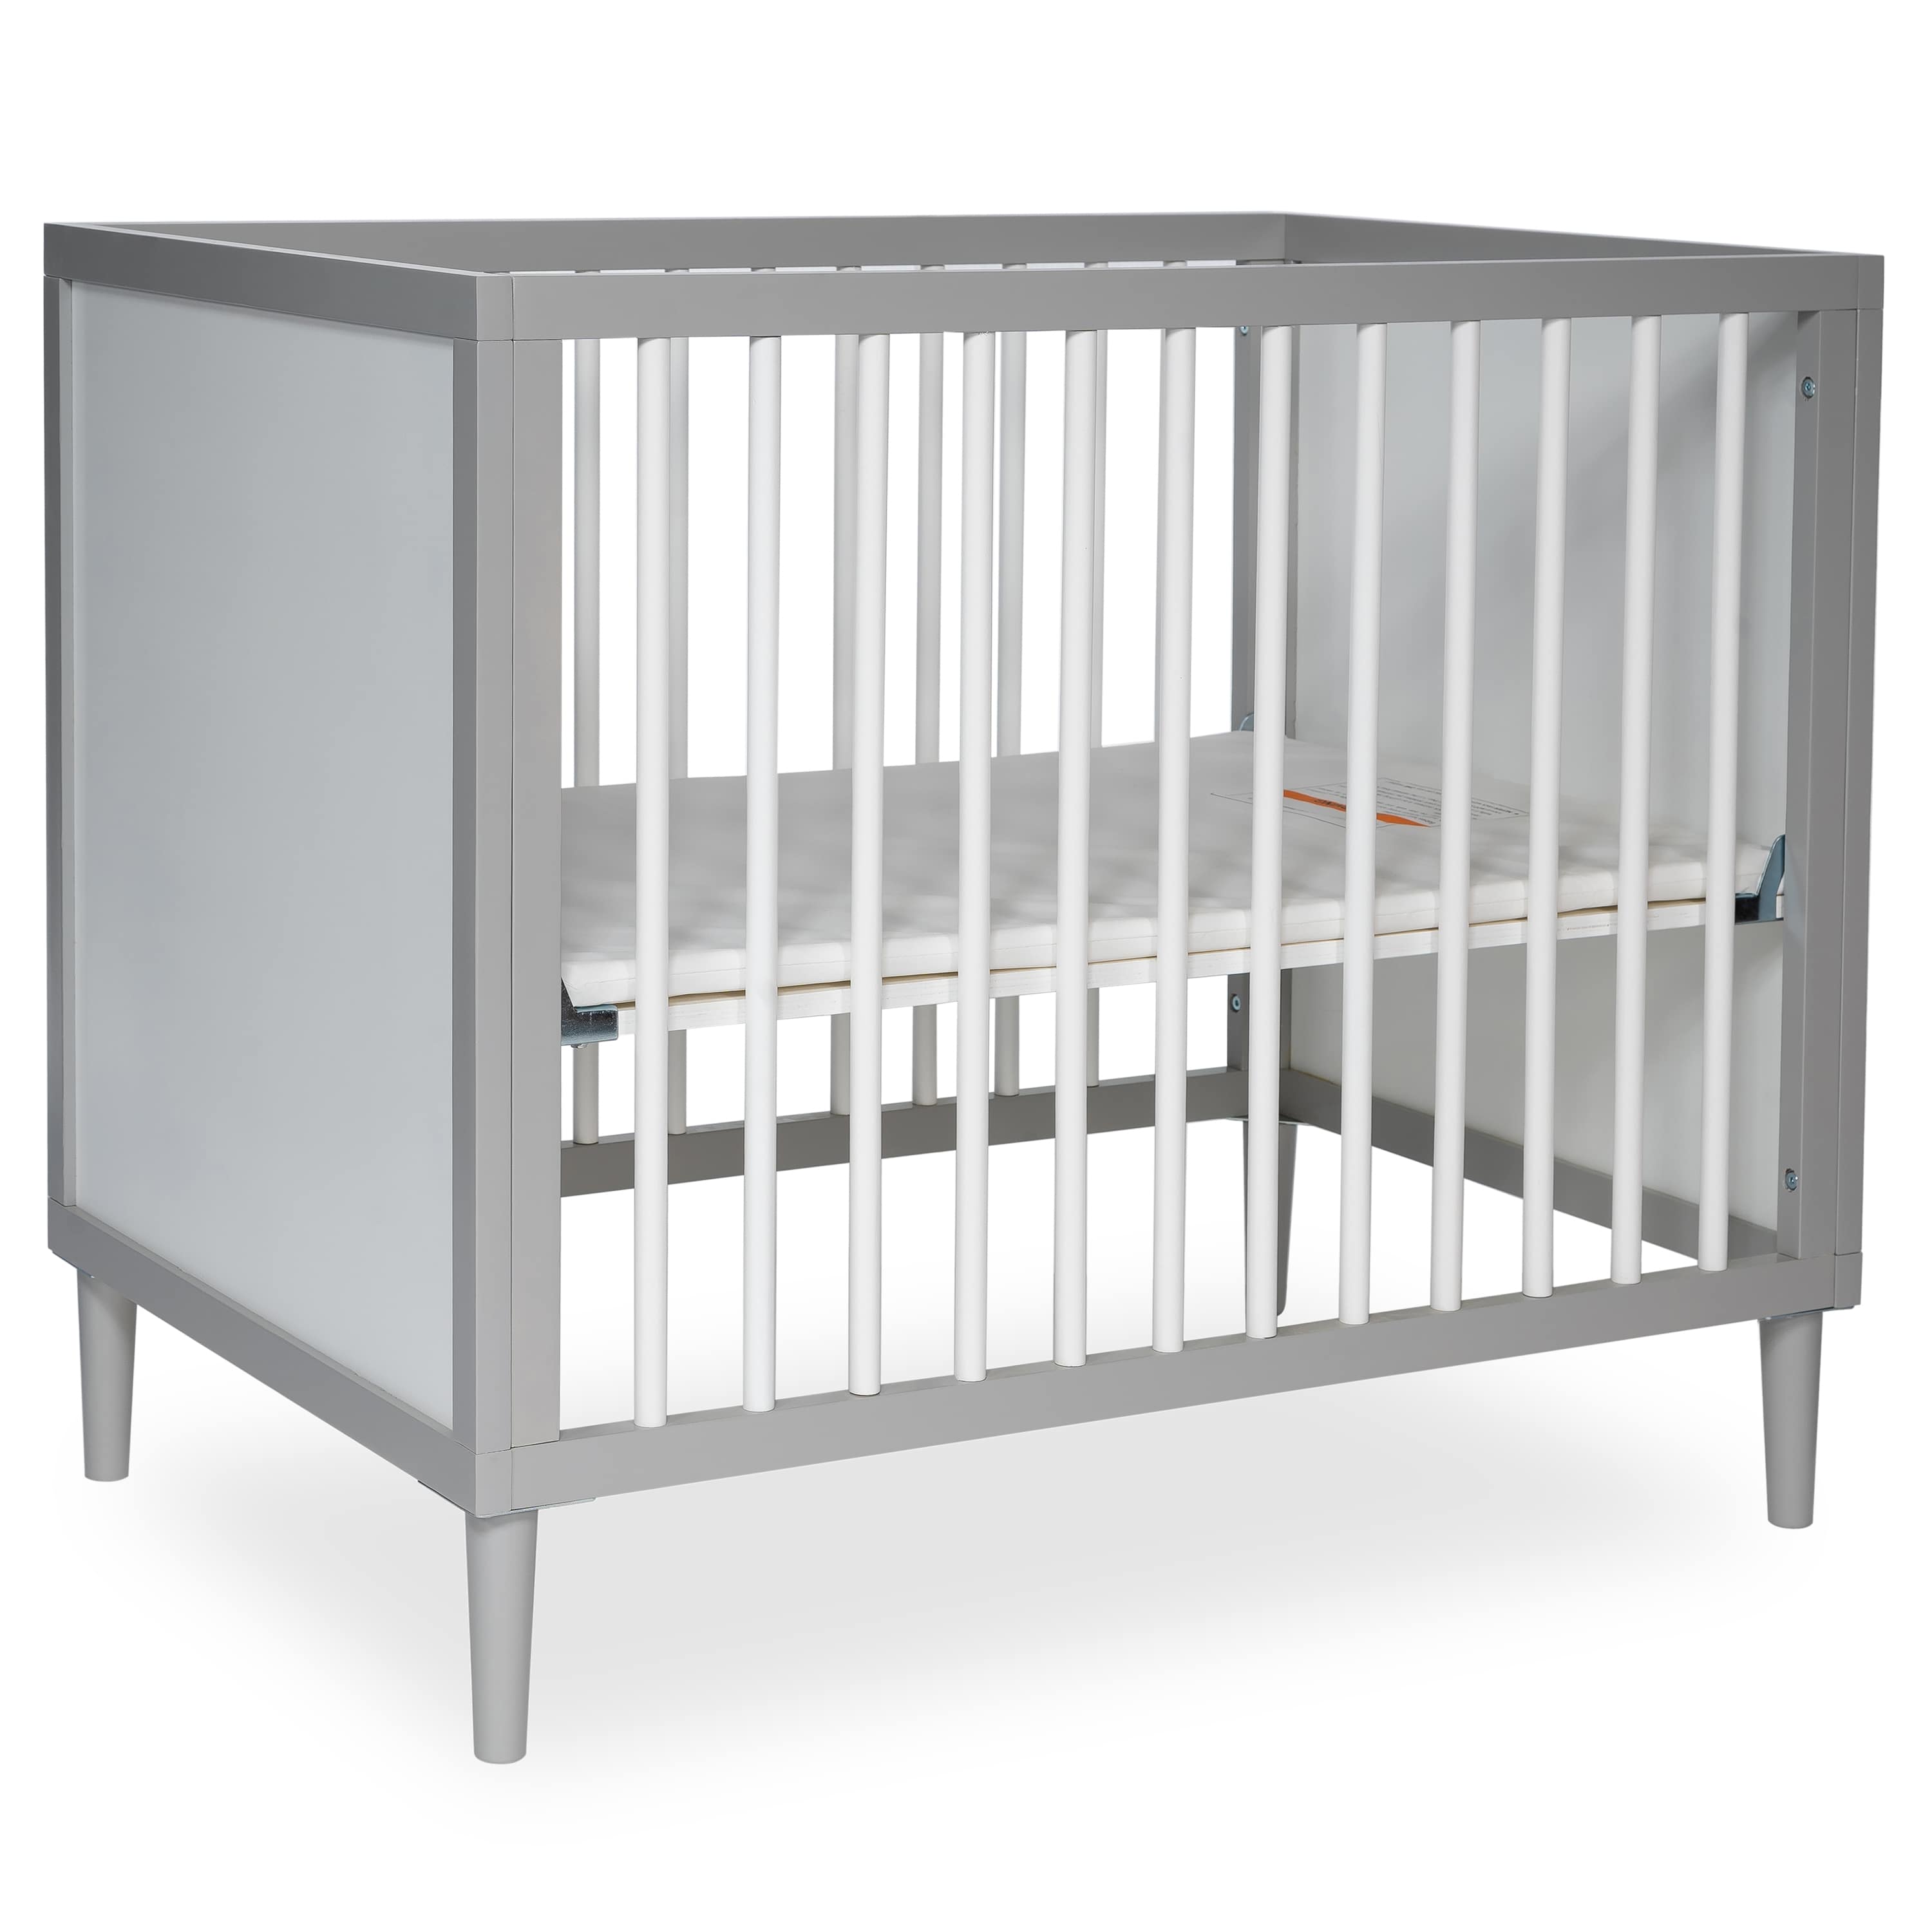 Century Meets Modern I Portable Crib Dream On Me Lucas 4-in-1 Mini Modern Crib with Rounded Spindles I Convertible Crib I Mid 